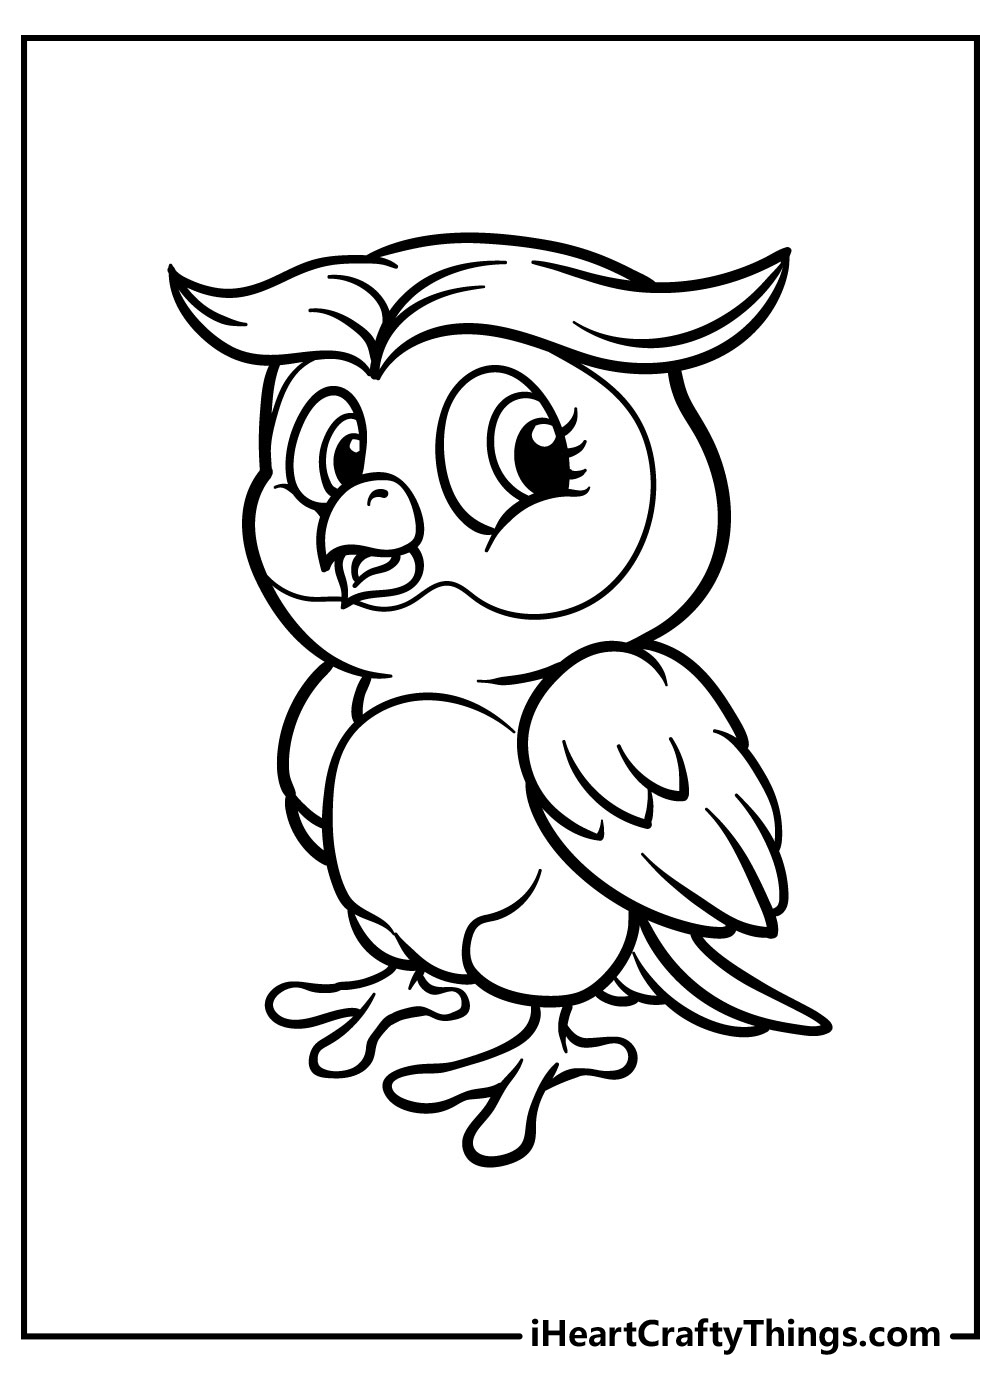 owl patterns coloring pages